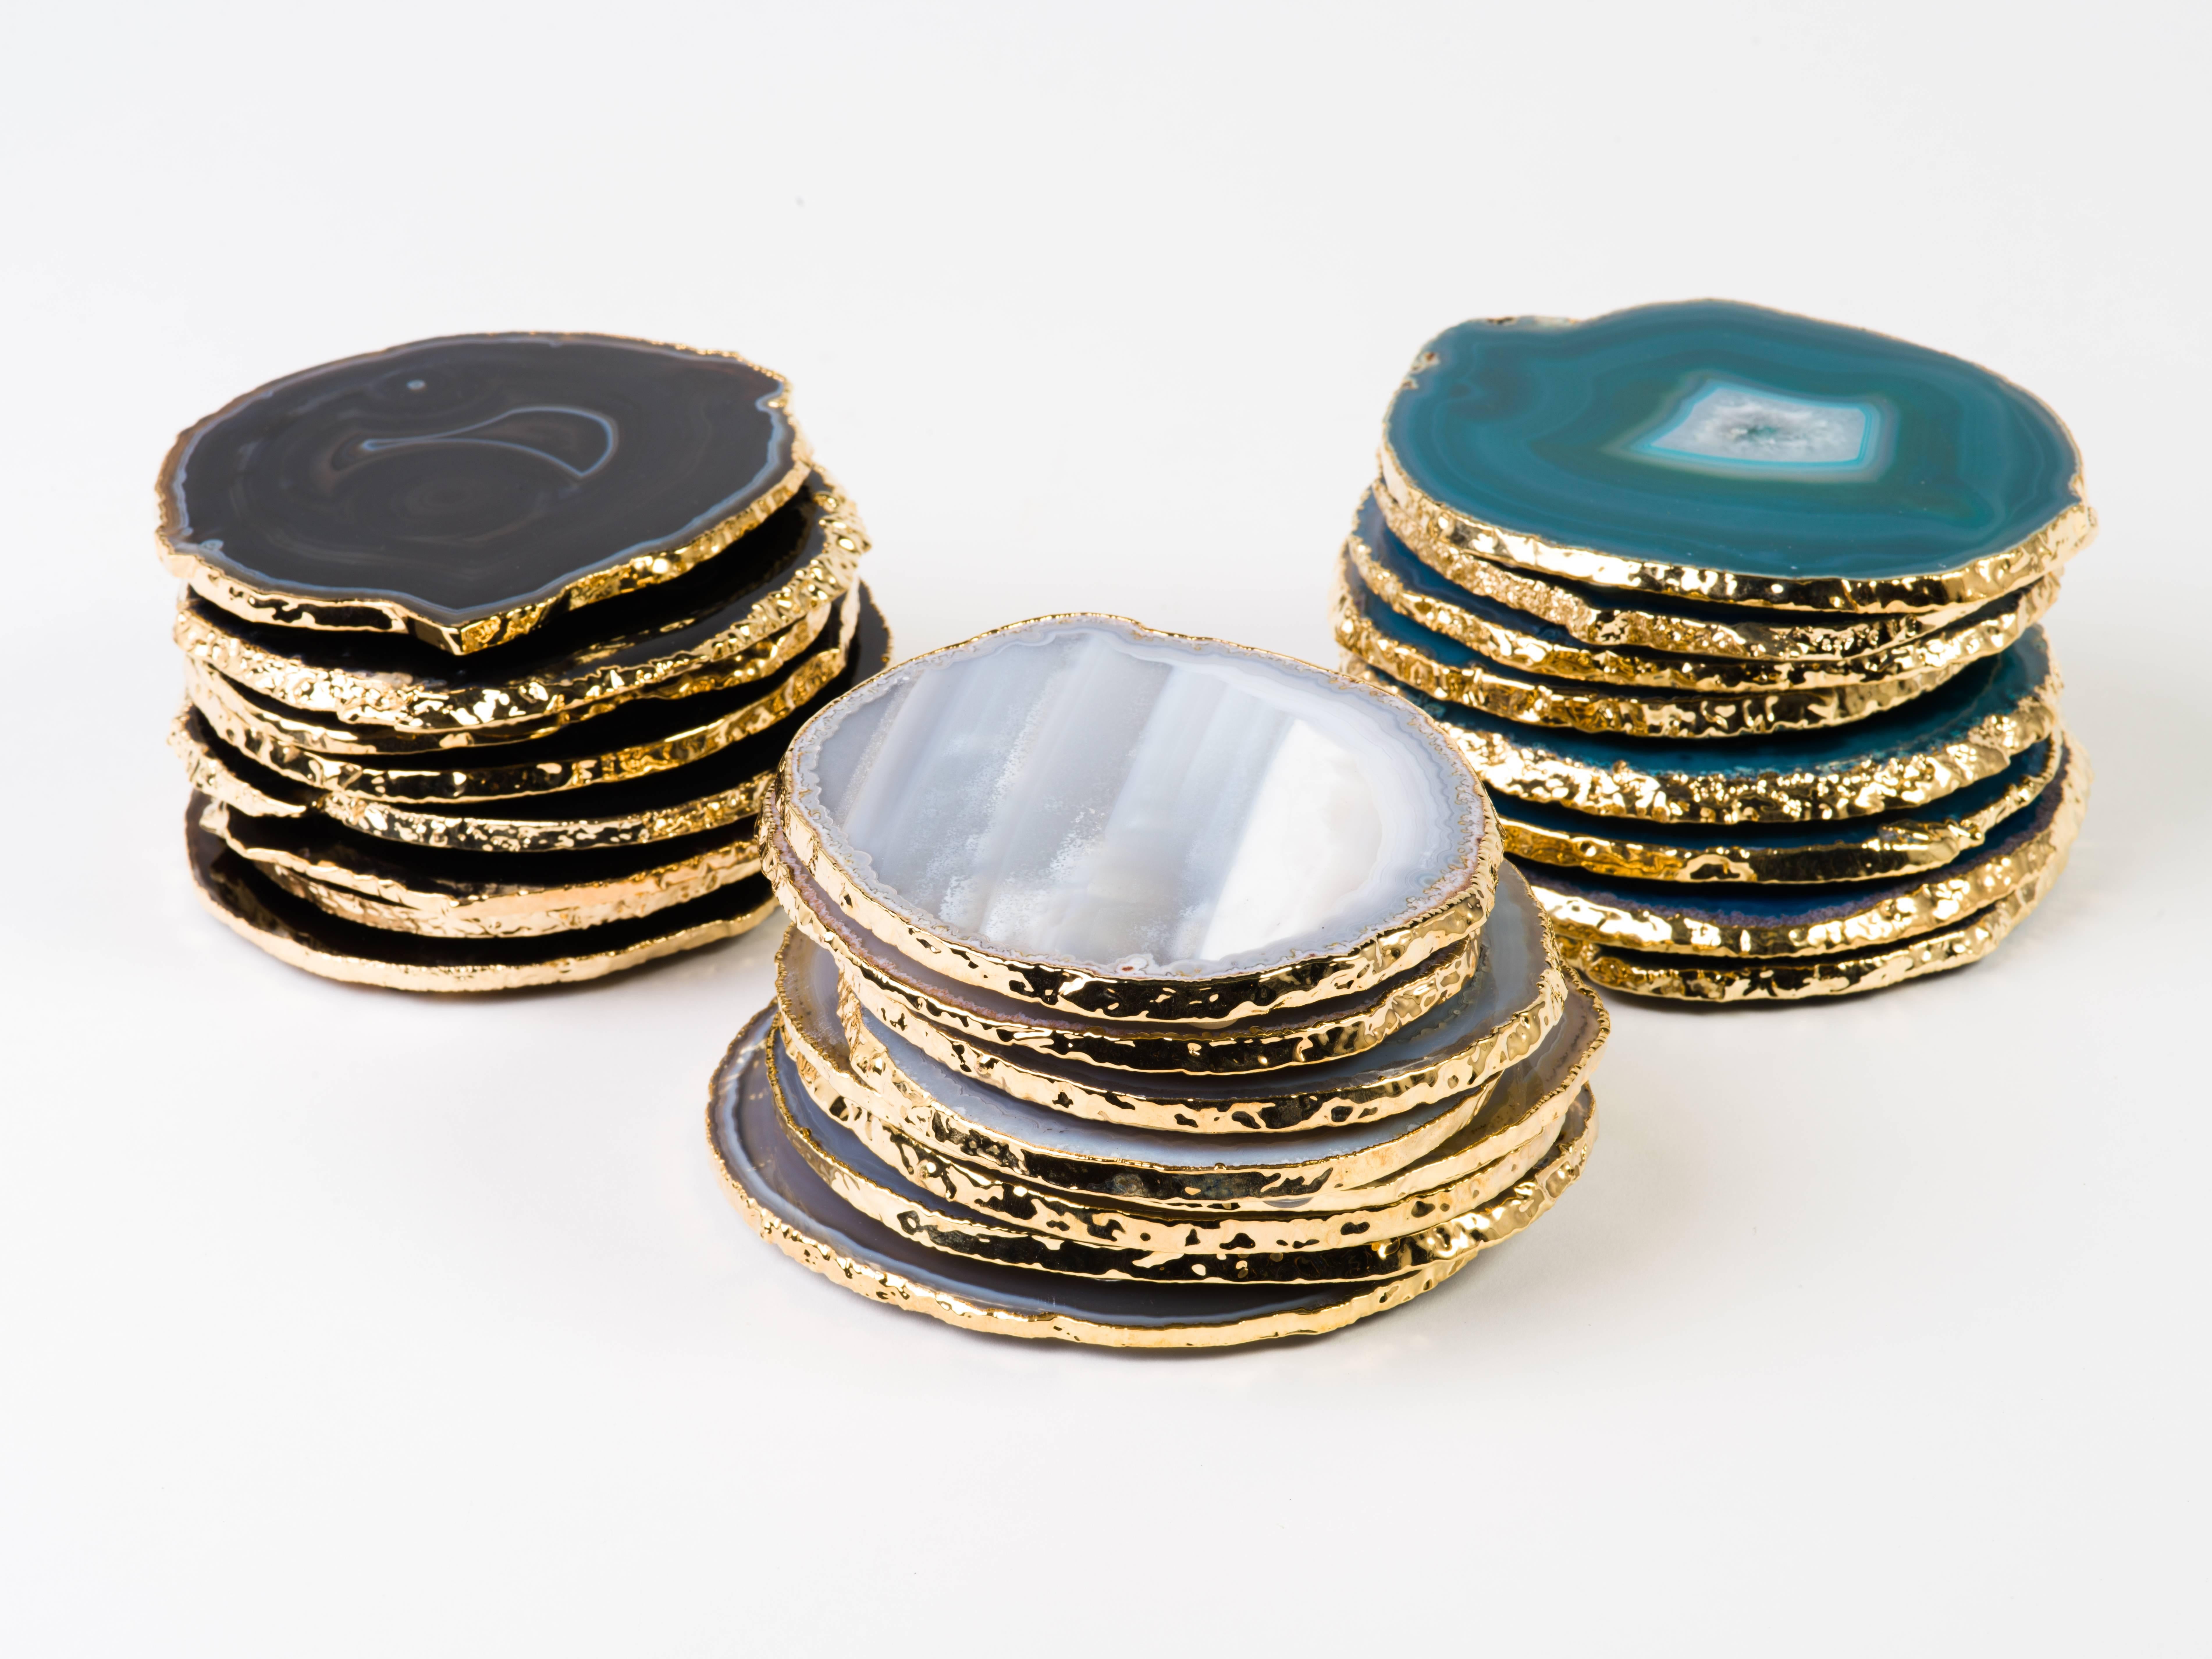 Stunning natural agate and crystal coasters with 24-karat gold-plated edges. Polished fronts and natural rough edges. No pieces are alike. Make beautiful accessories to any coffee table or dining table setting. Three color variations are available: